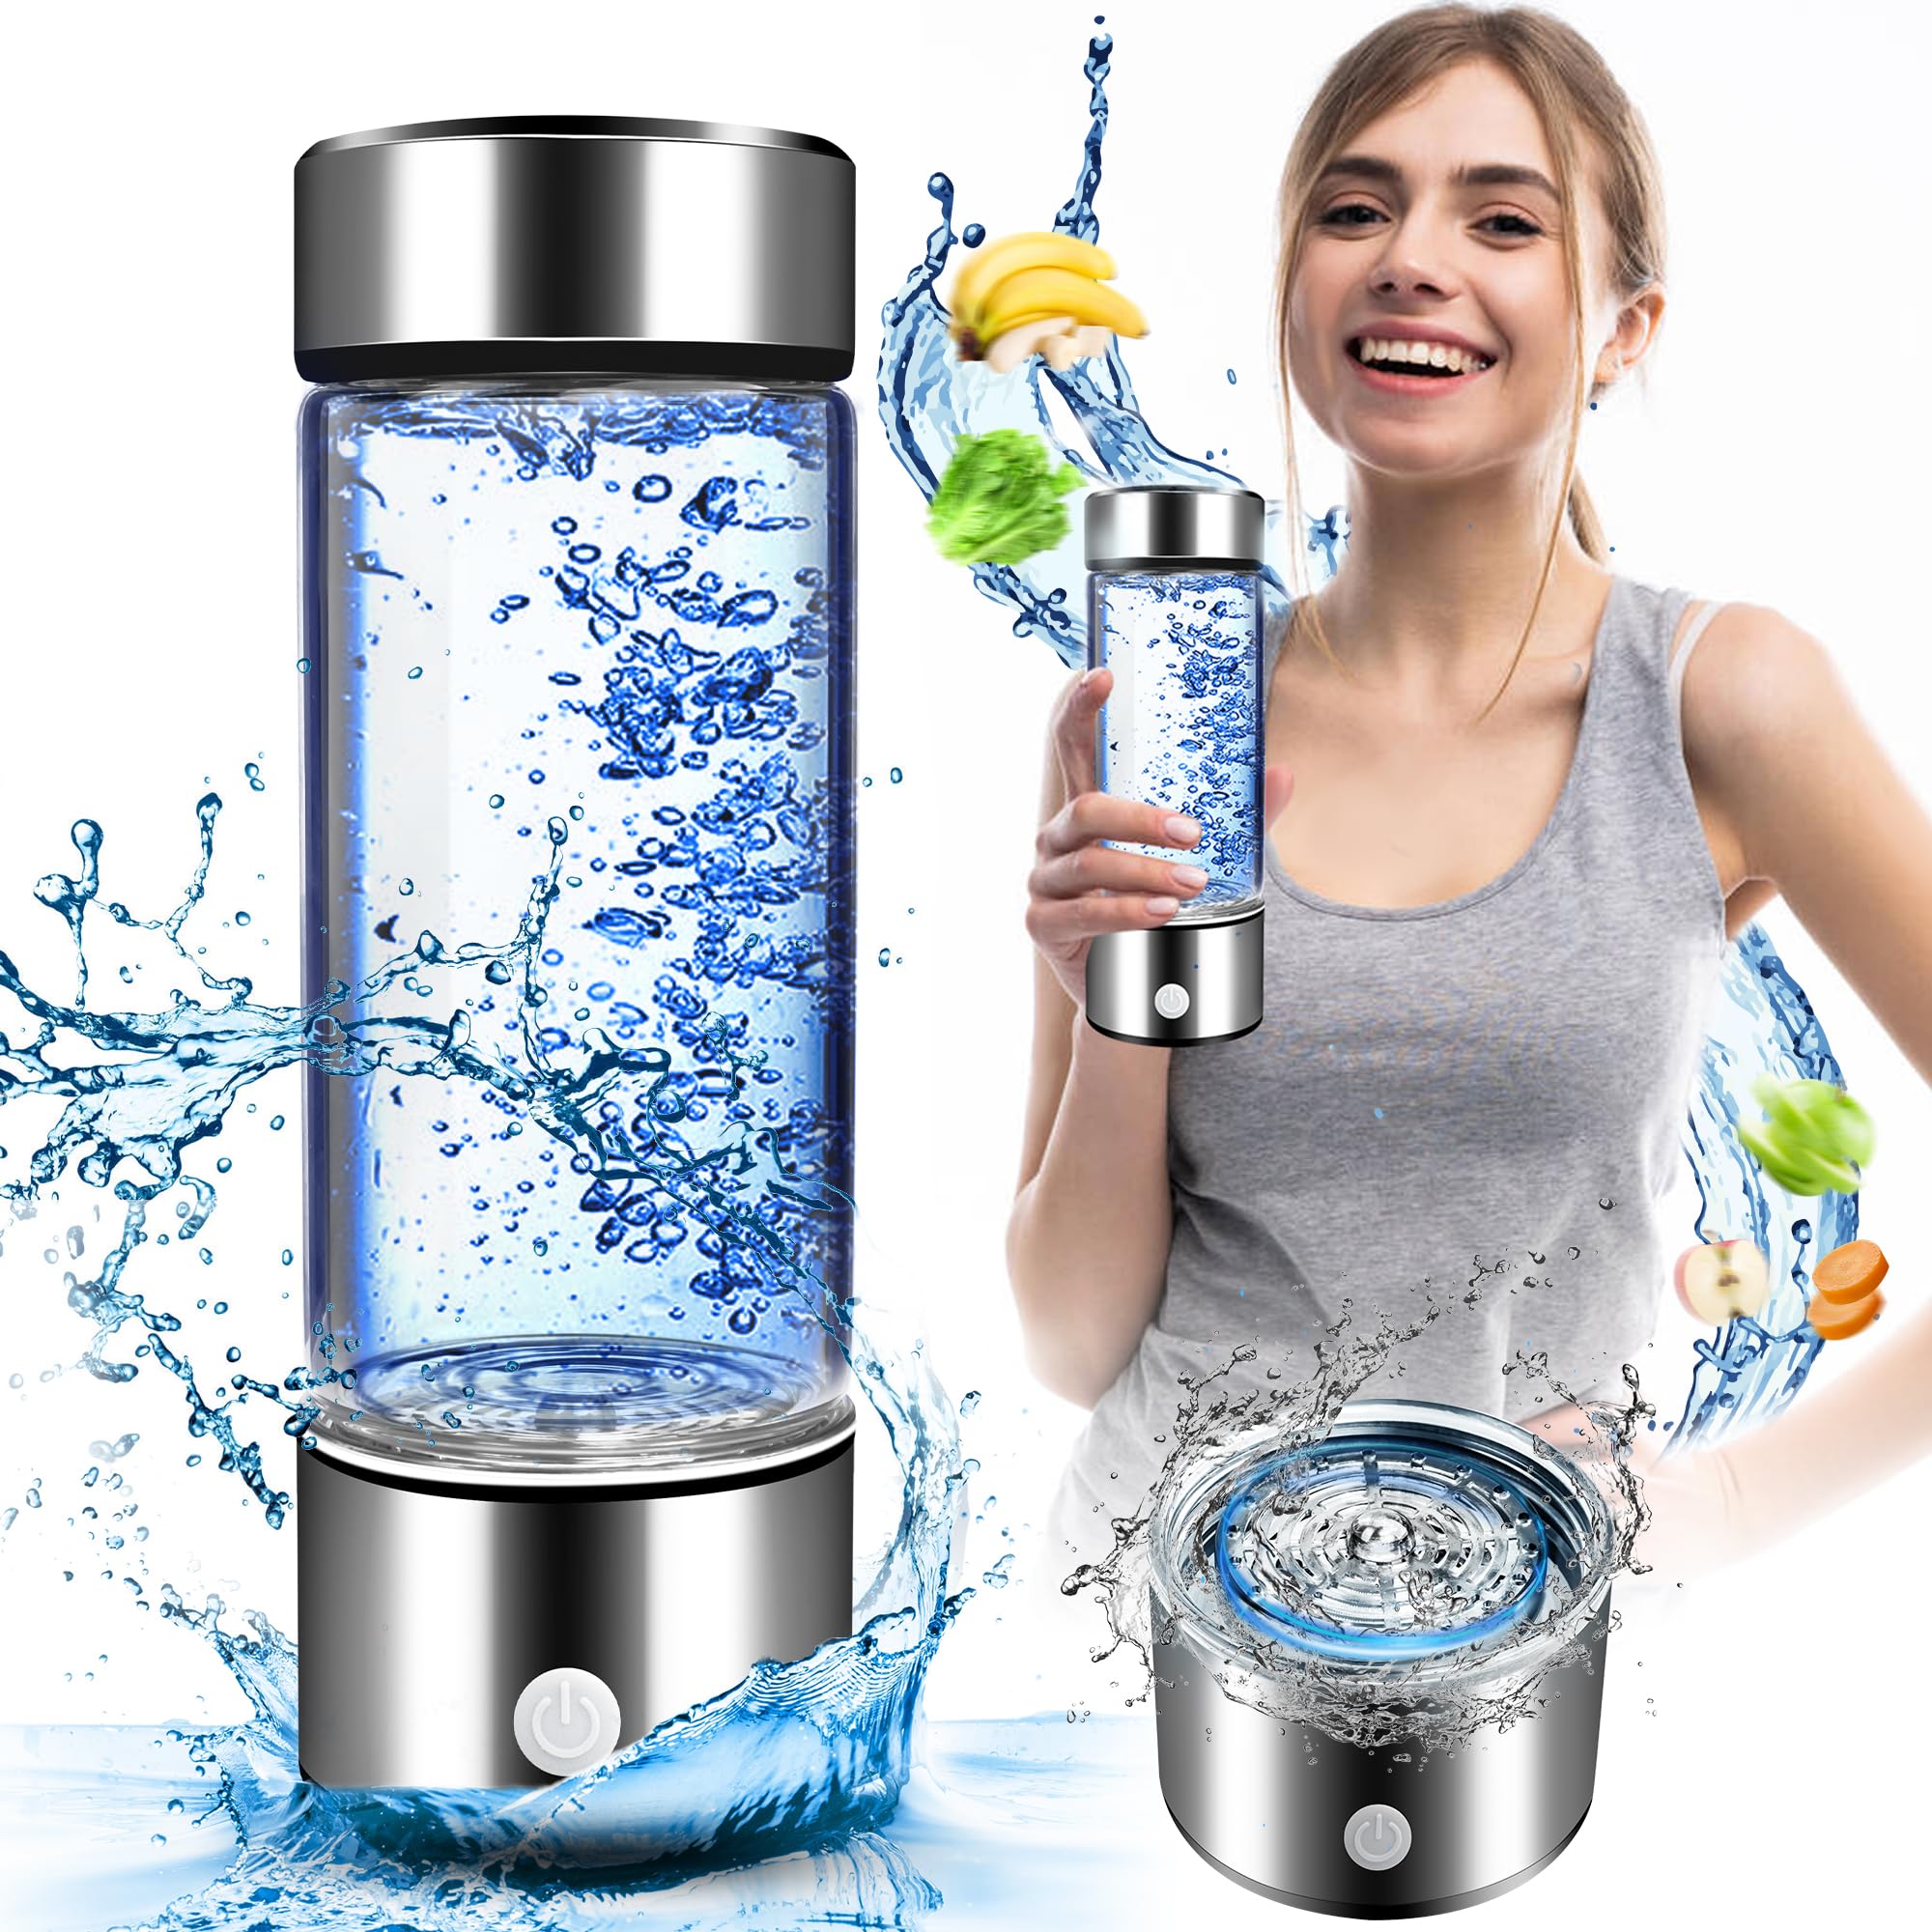 Hydrogen Water Bottle, Portable Hydrogen Water Bottle Generator, Ion Water Bottle Improve Water Quality in 3 Minutes, Water Ionizer Machine Suitable for Home, Office, Travel and Daily Drinking